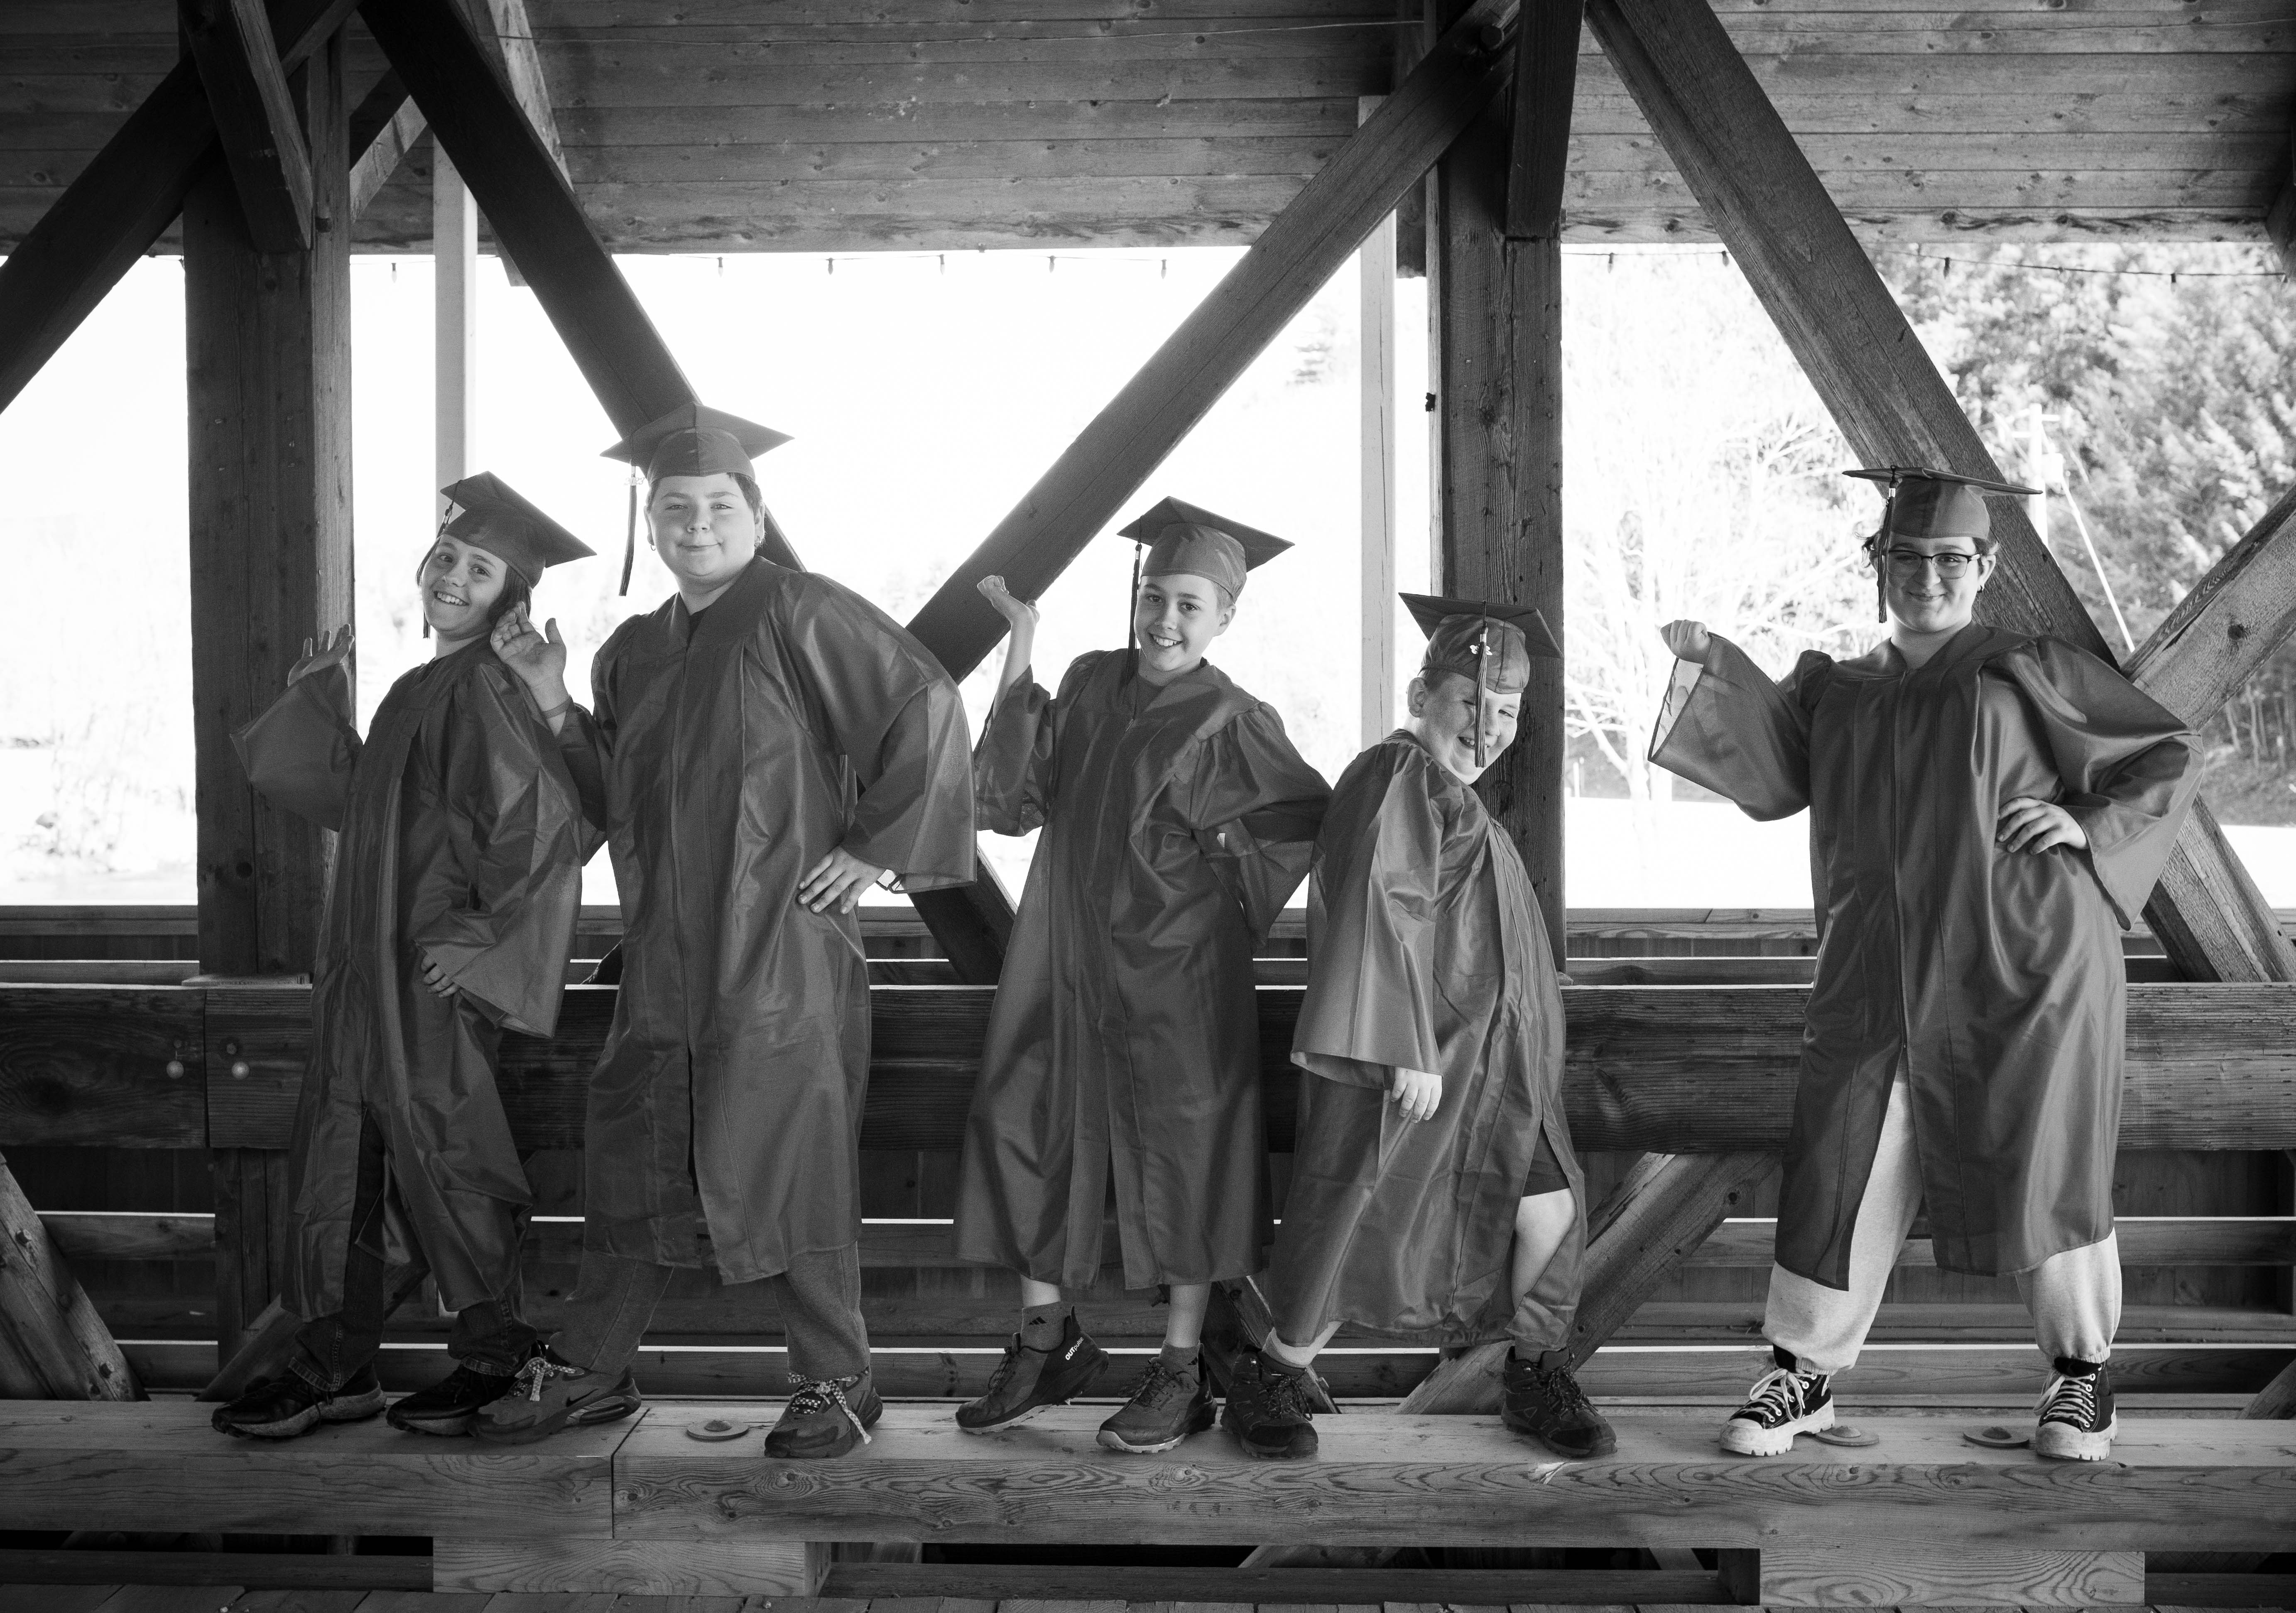 Five Graduate strike funny poses while wearing their caps and gowns. 